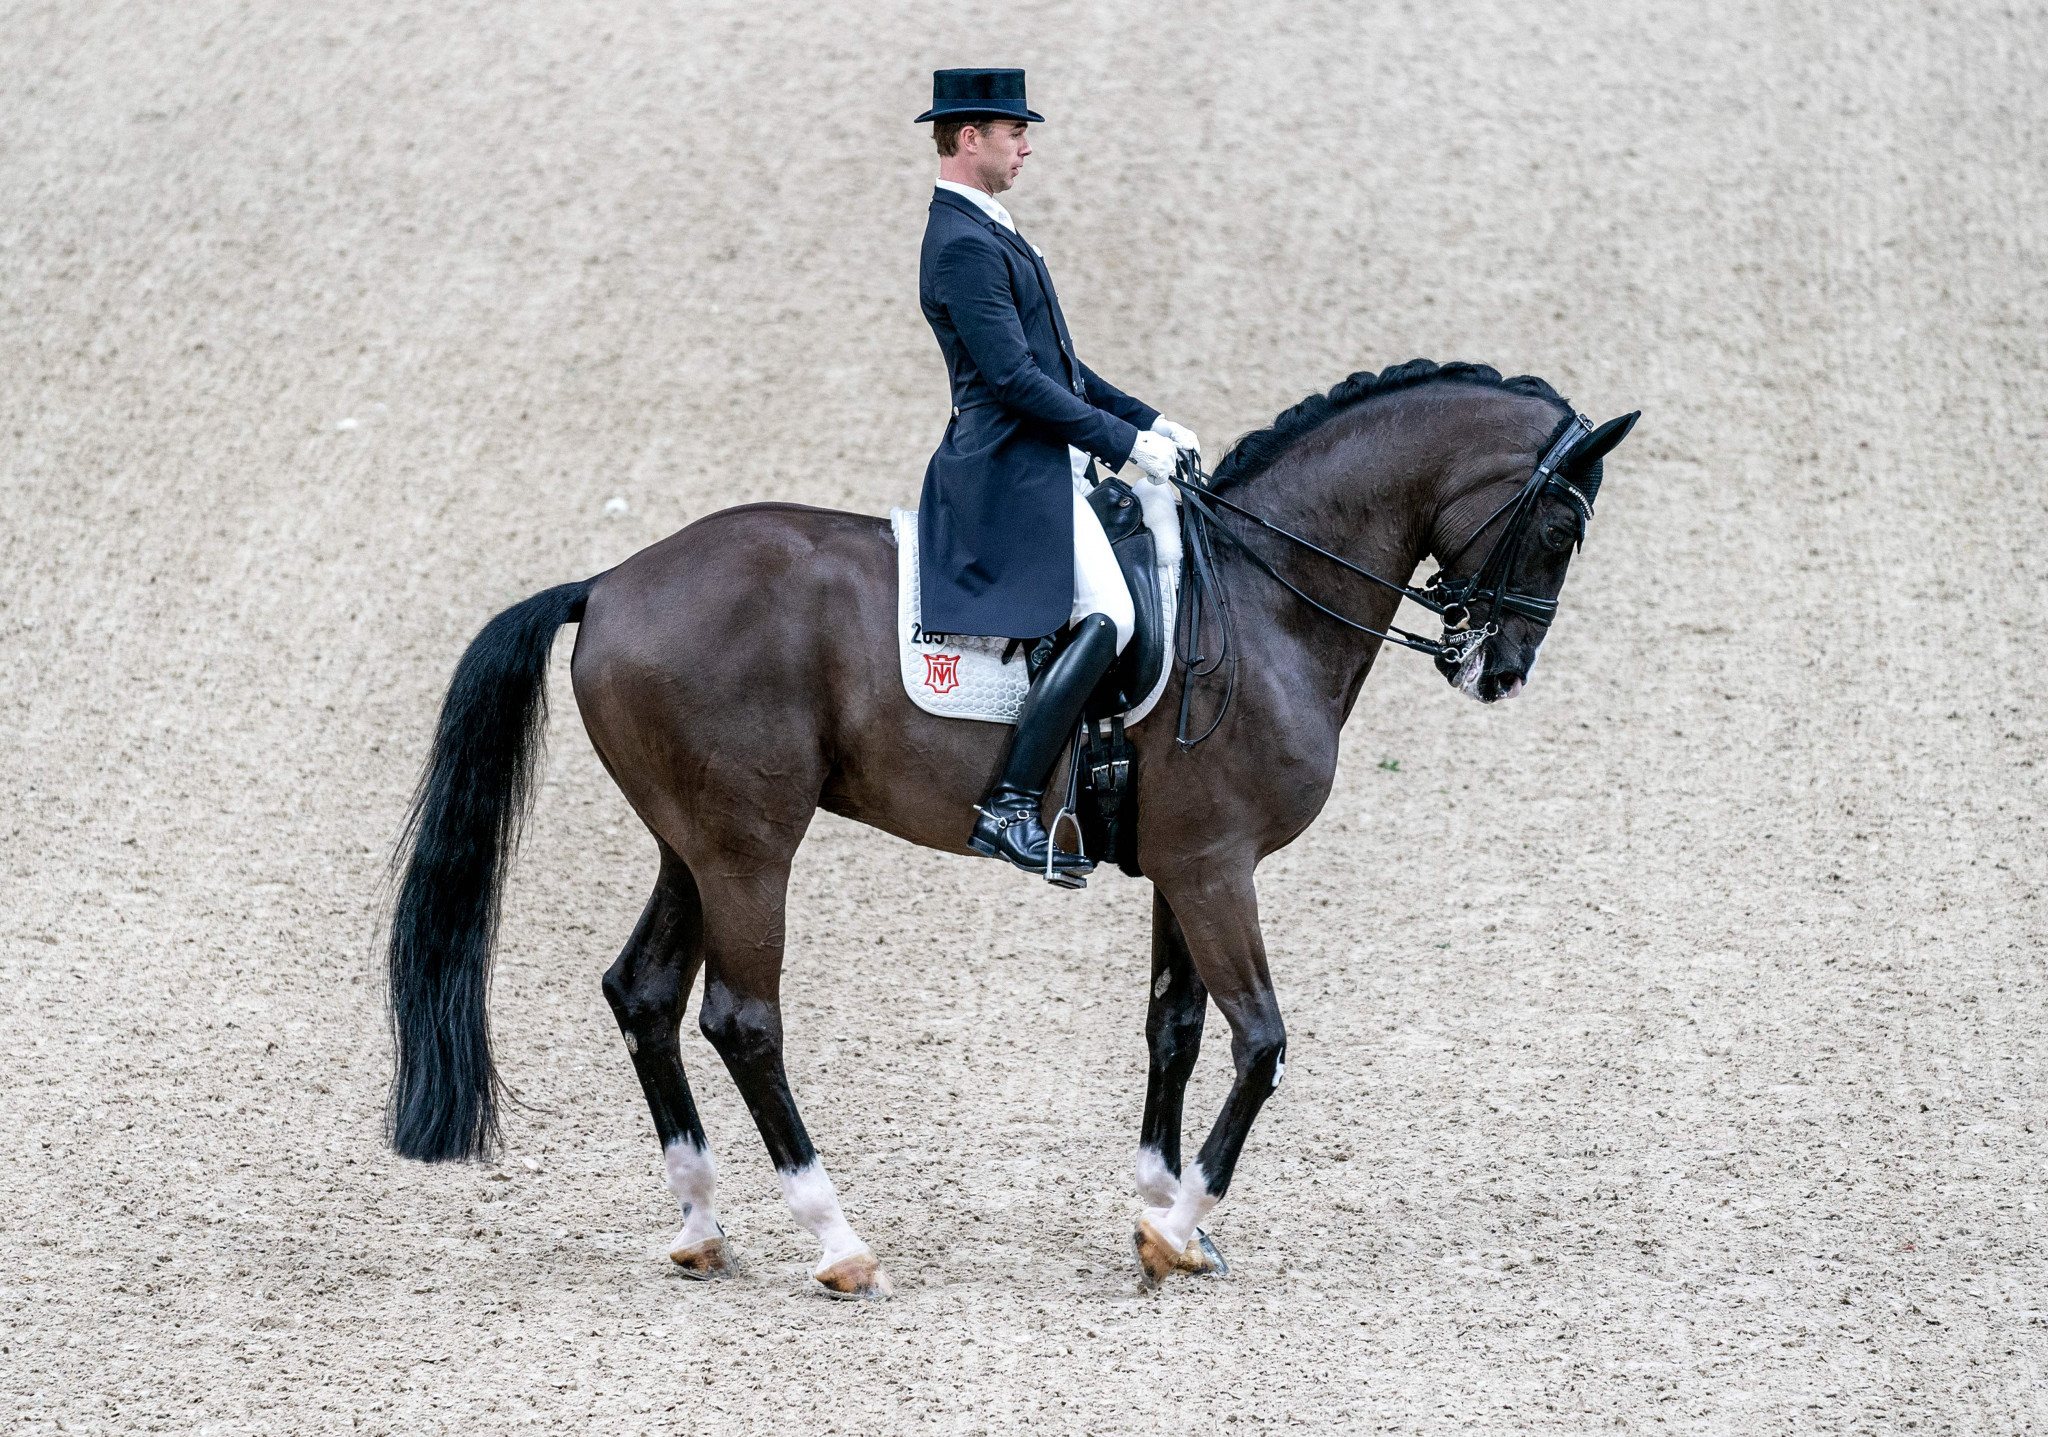 Dressage riders send petition asking FEI to allow top hats during competition